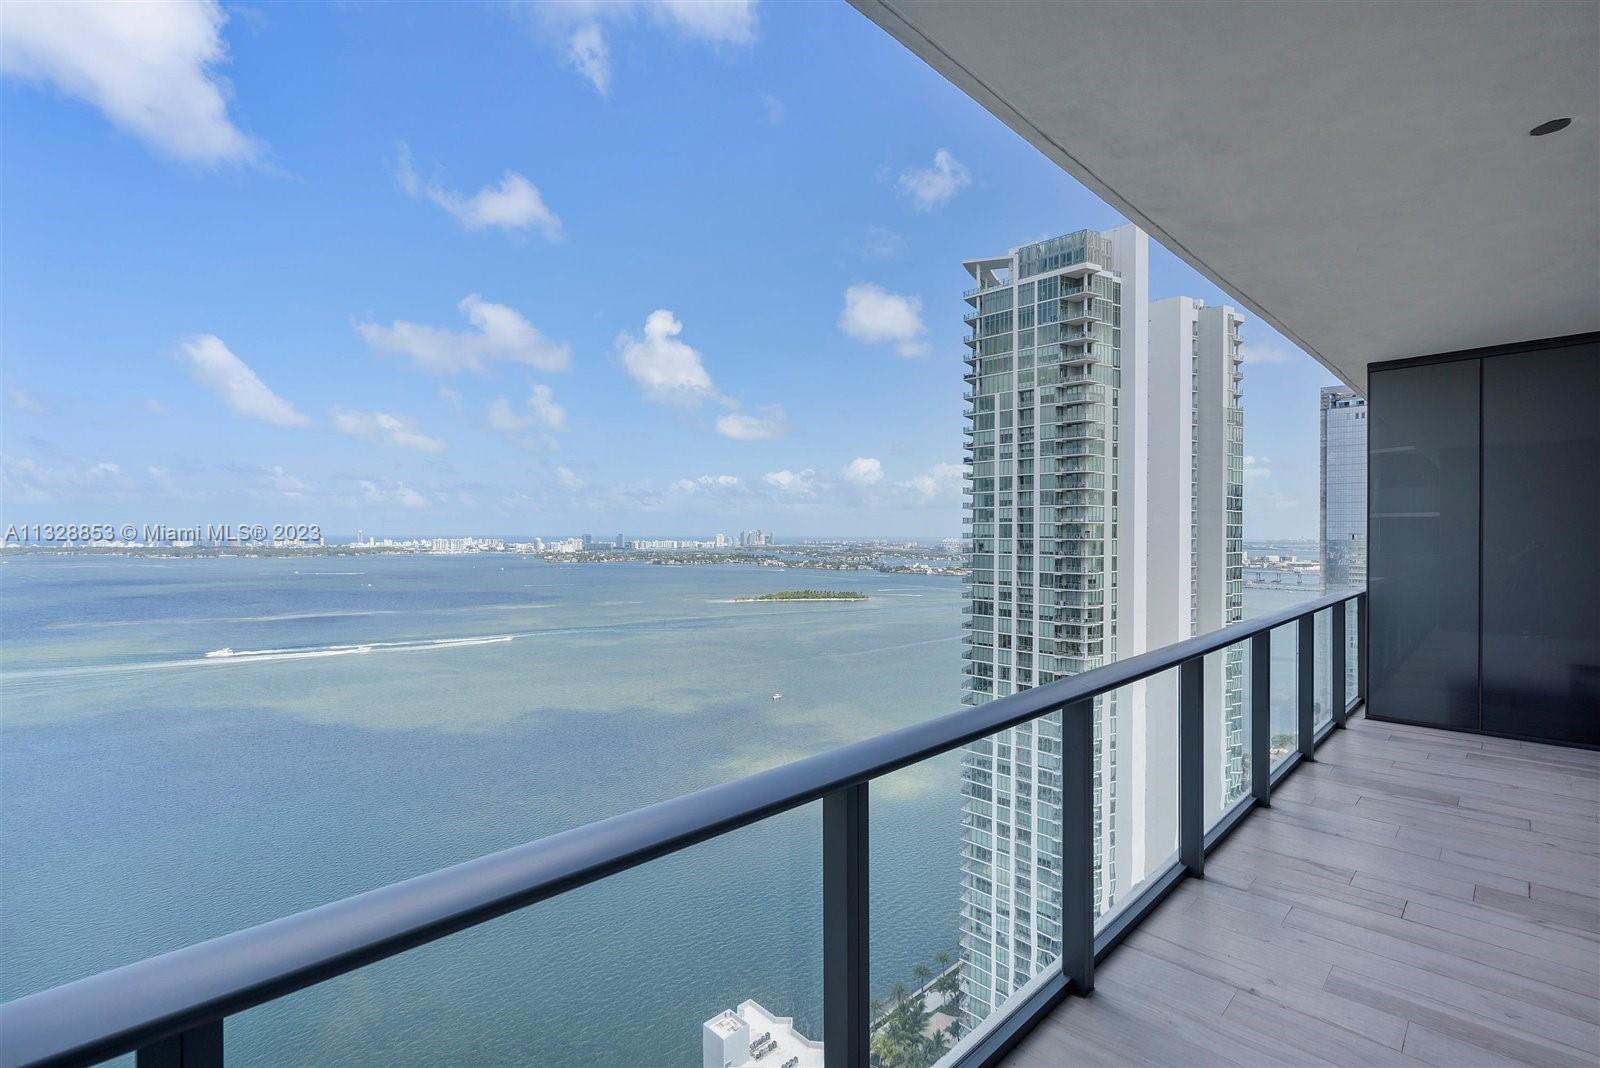 Stunning 2 bedroom + Den/ 2 bathrooms unit at Gran Paraiso in Edgewater. Breath taking views to the 